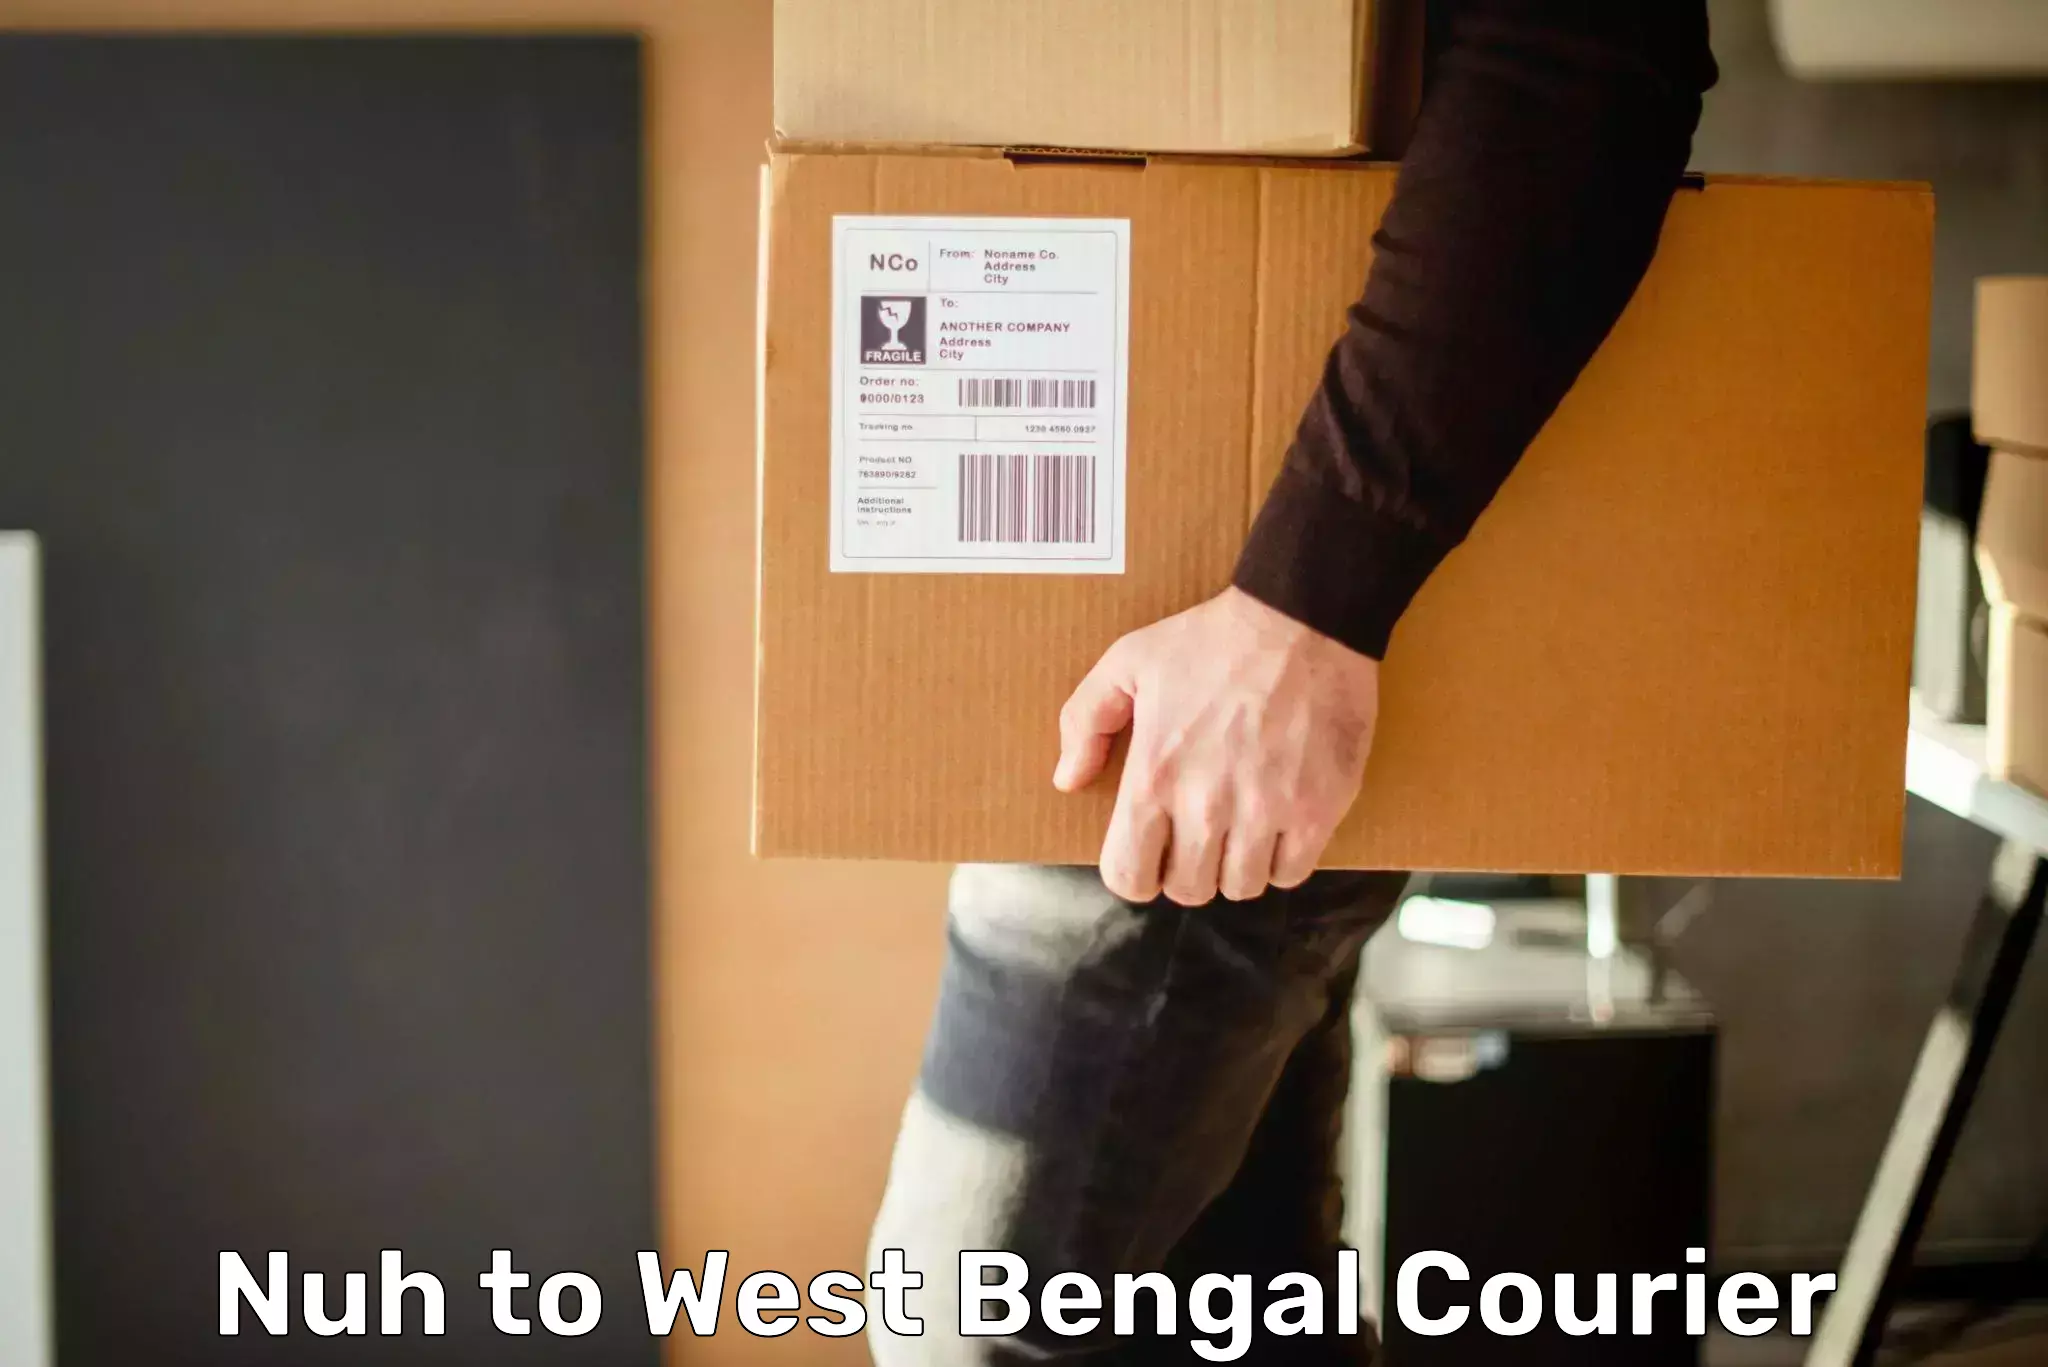 Cargo delivery service Nuh to West Bengal